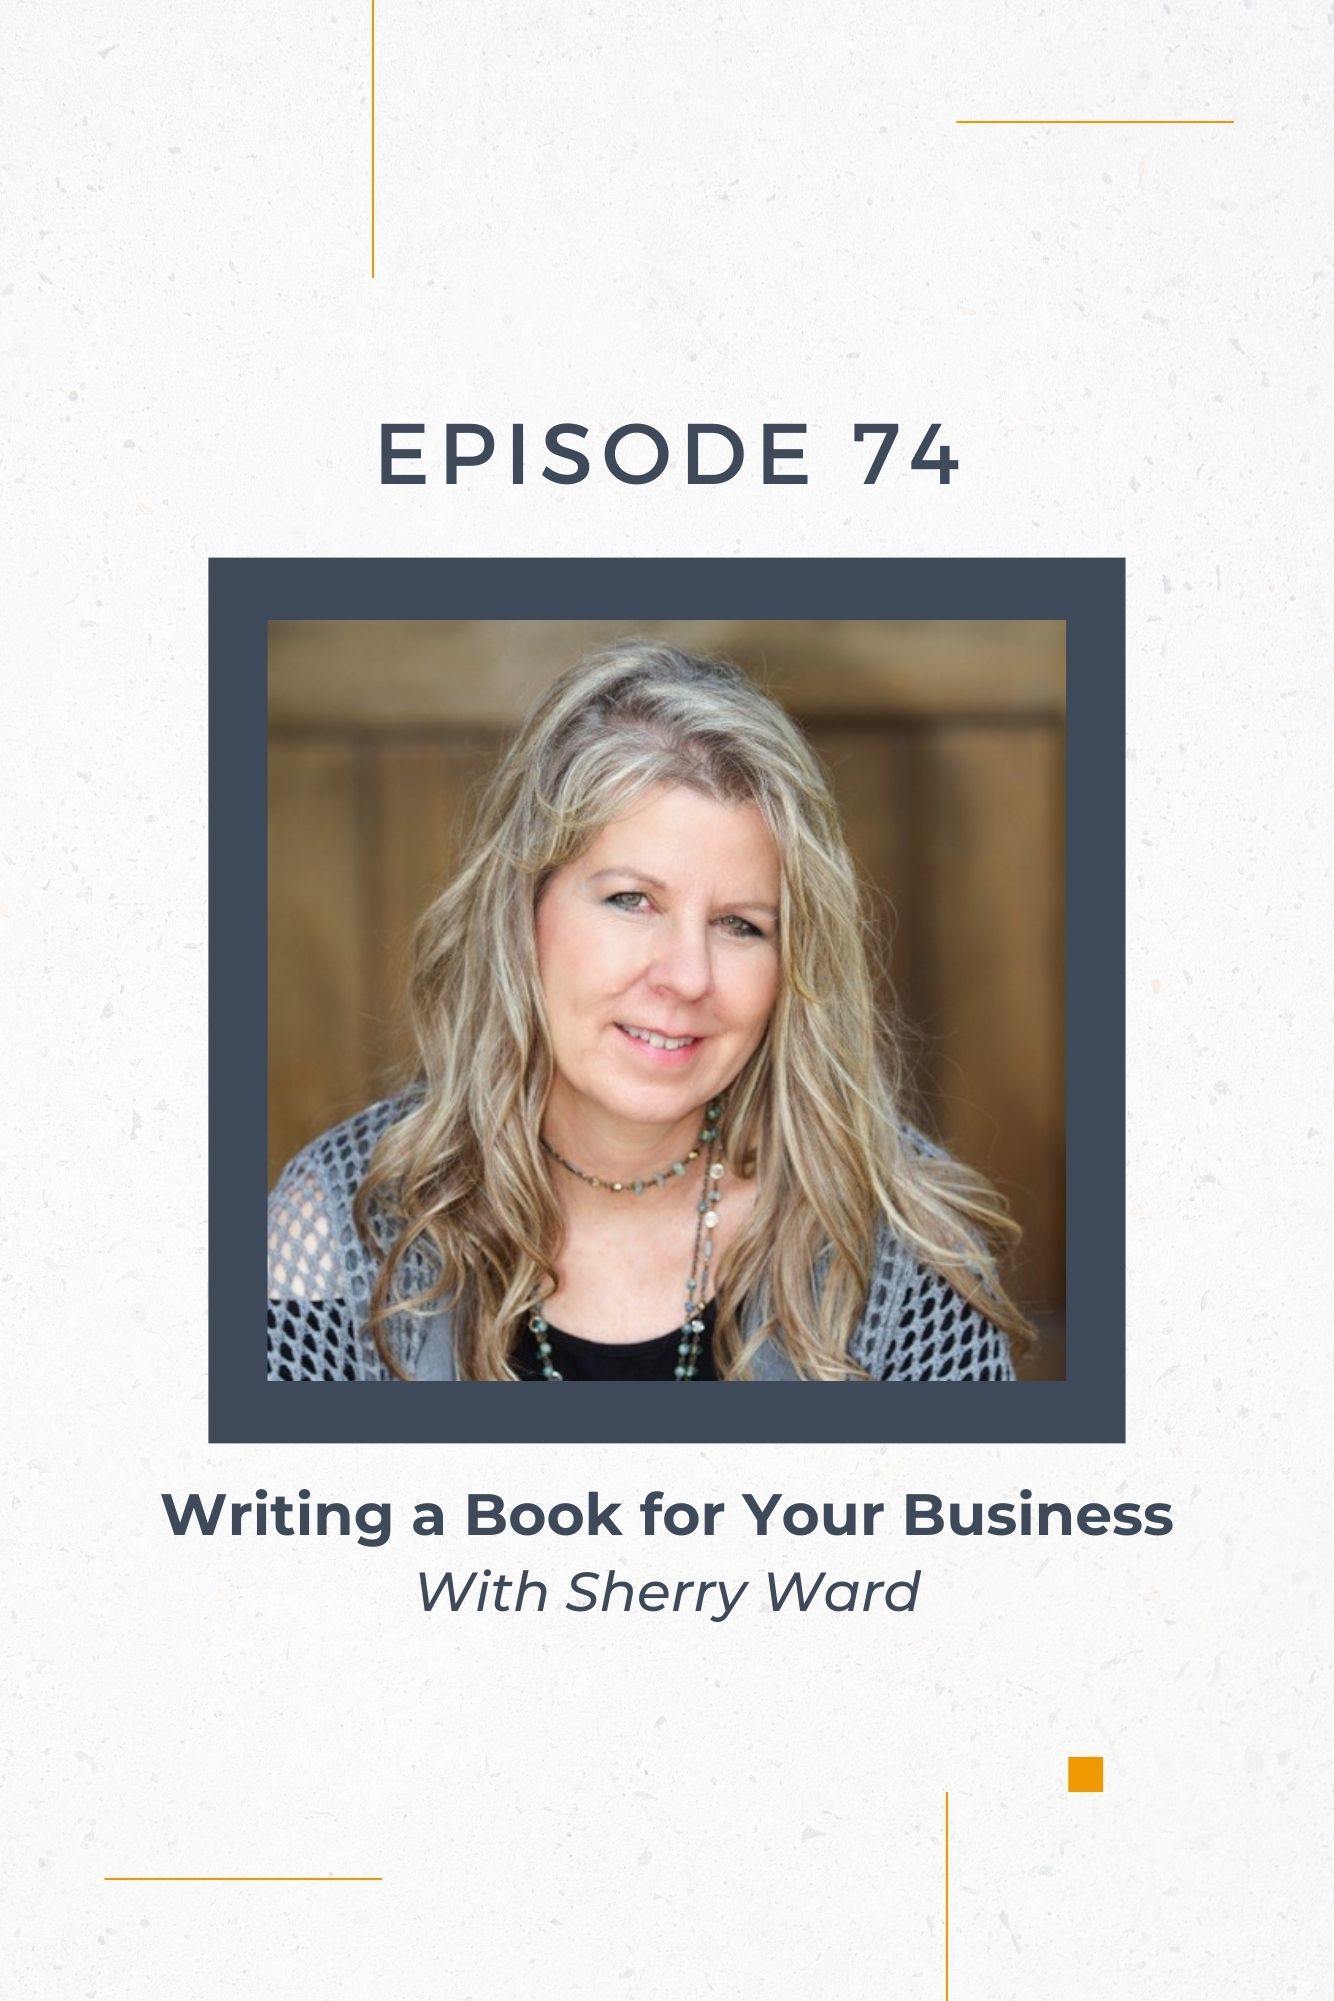 A picture of a Christian business author and book writer about how writing a book for your Christian business might be a good idea!